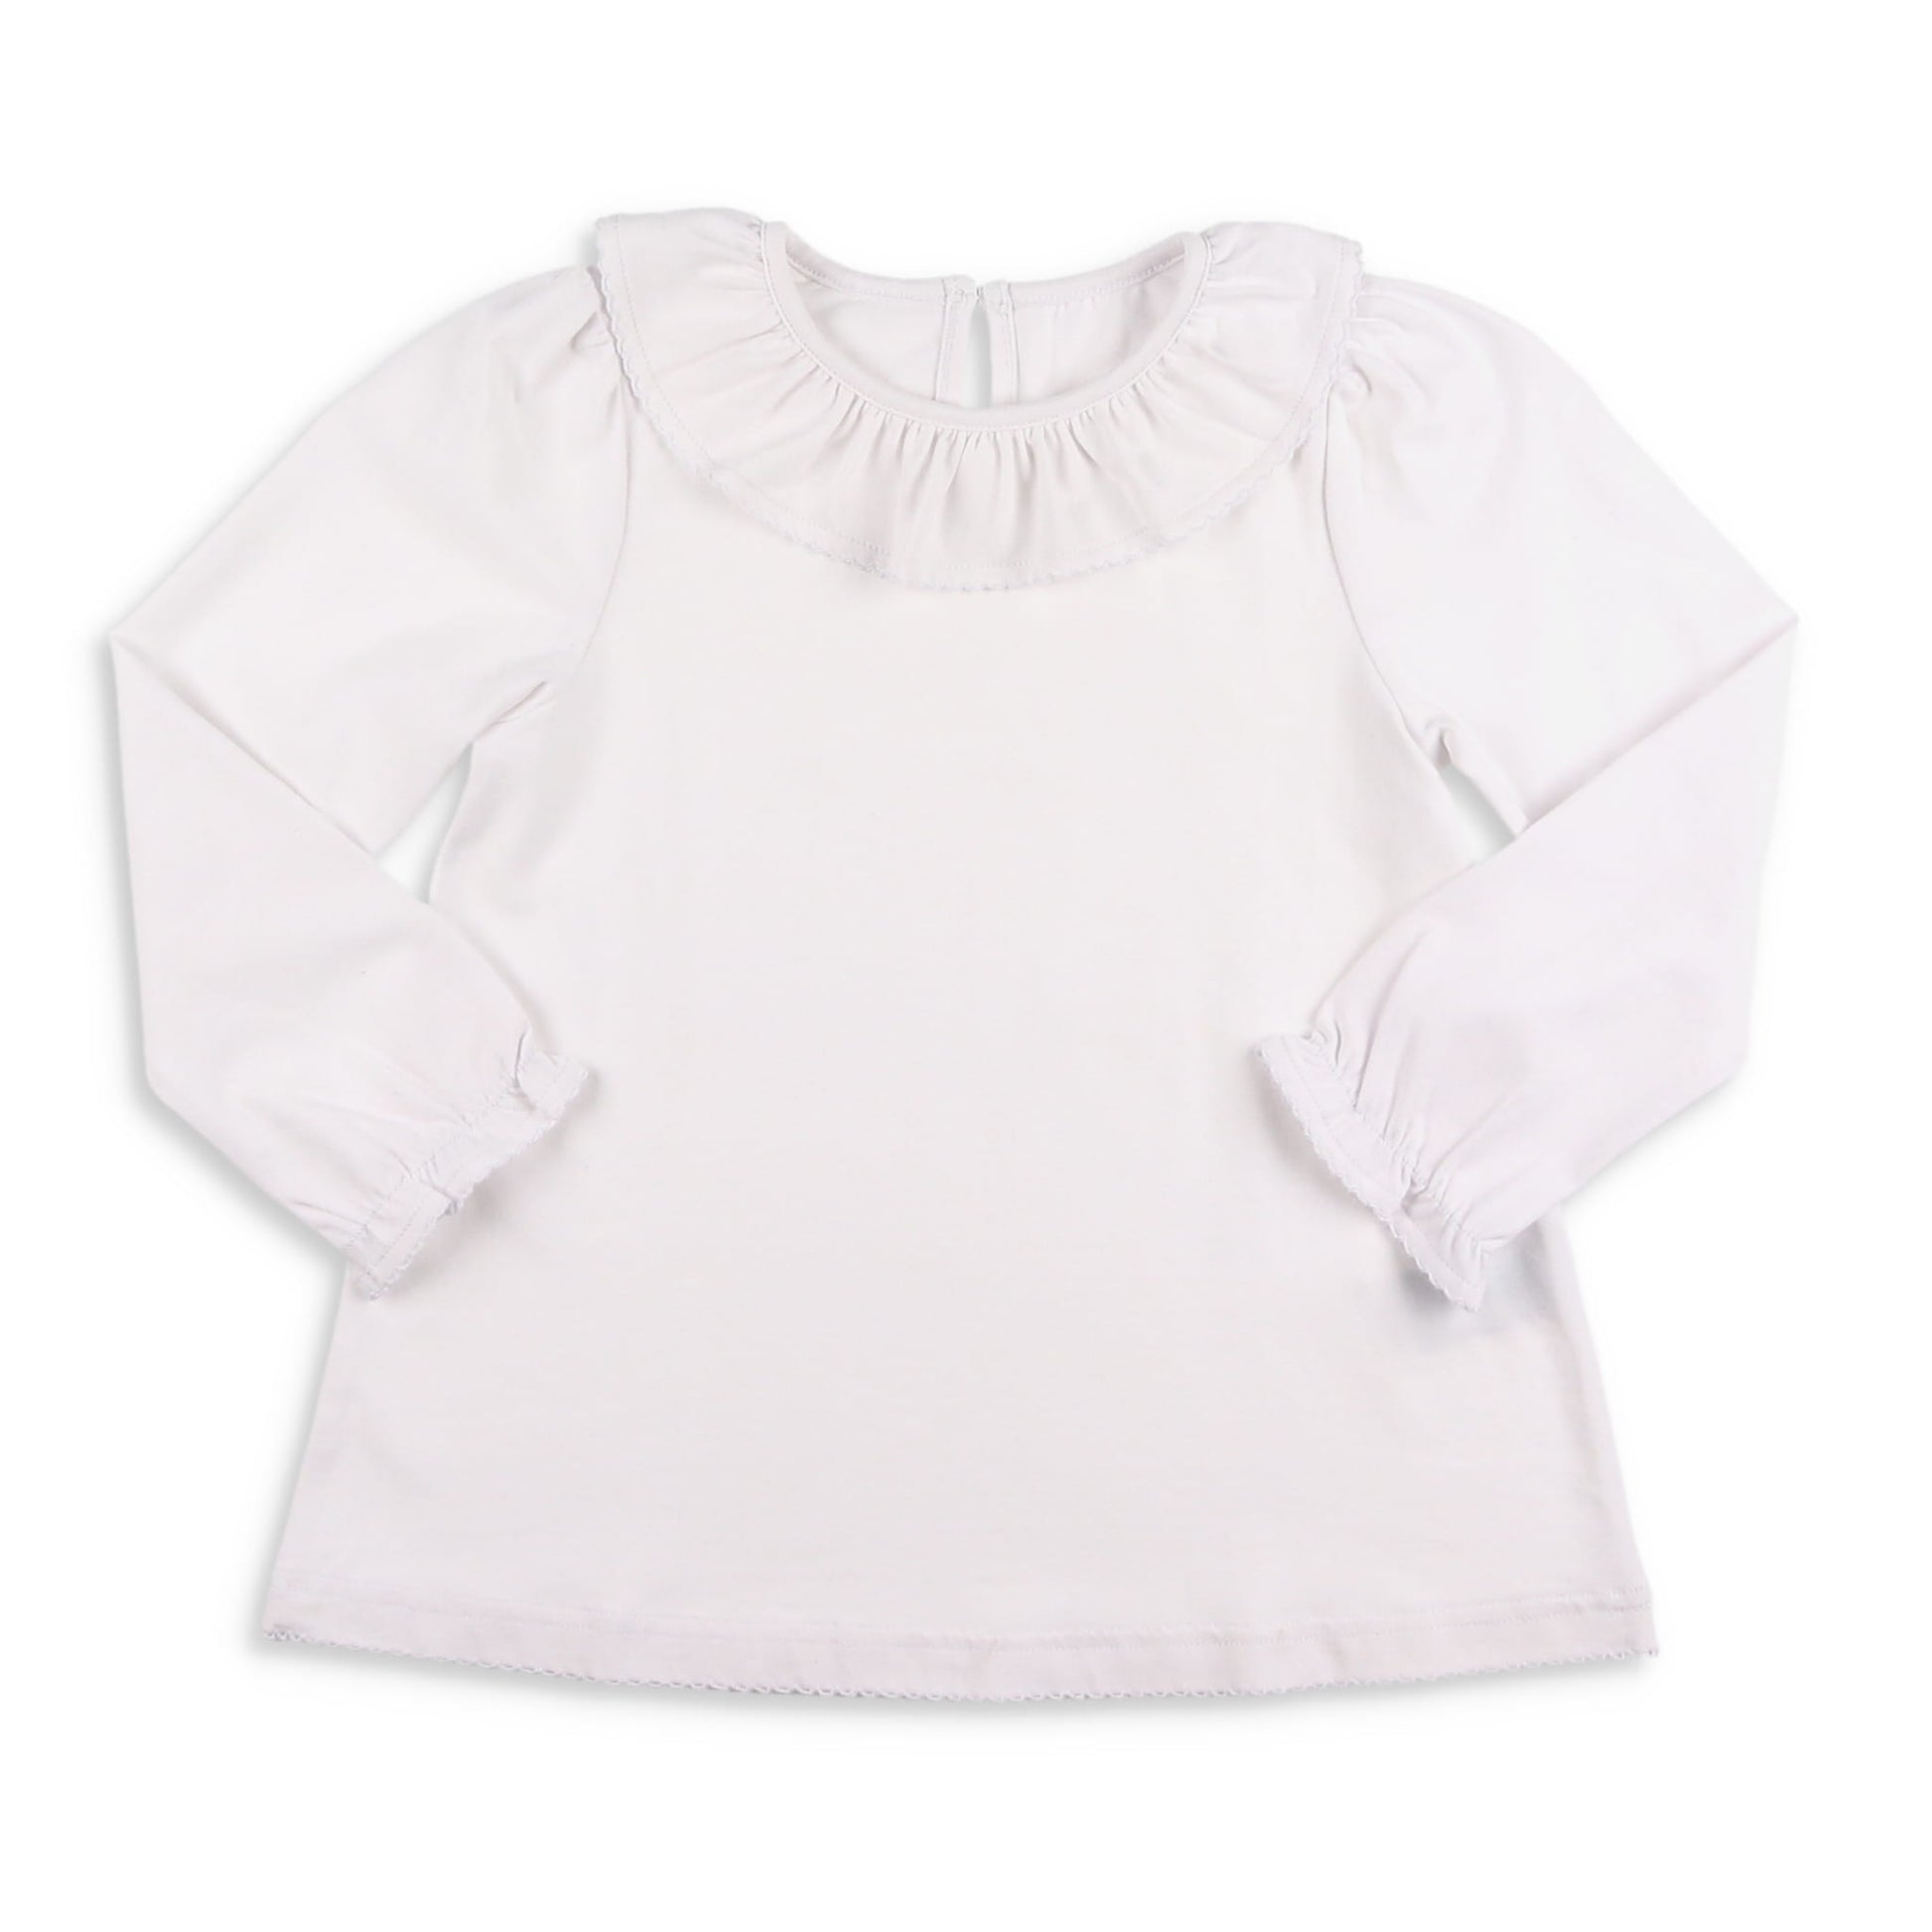 Sleeve Neck - Top Girls Shrimp Grits Ruffle Long and Kids